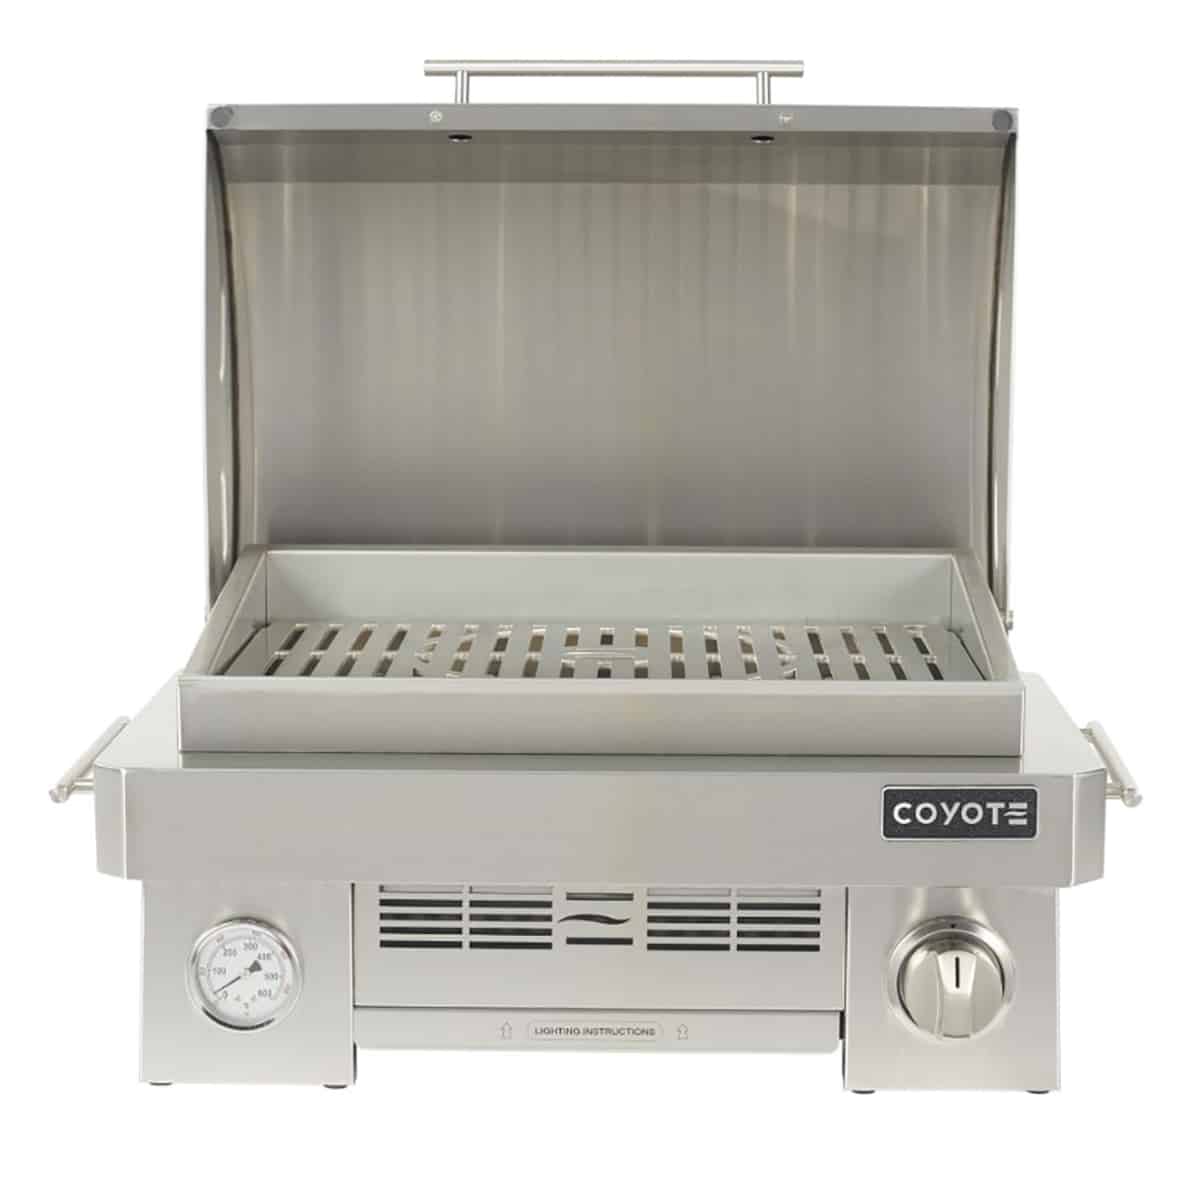 Coyote Propane Portable Grill With Infinity burner up to 20,000 btu Top Hood Cover OPen